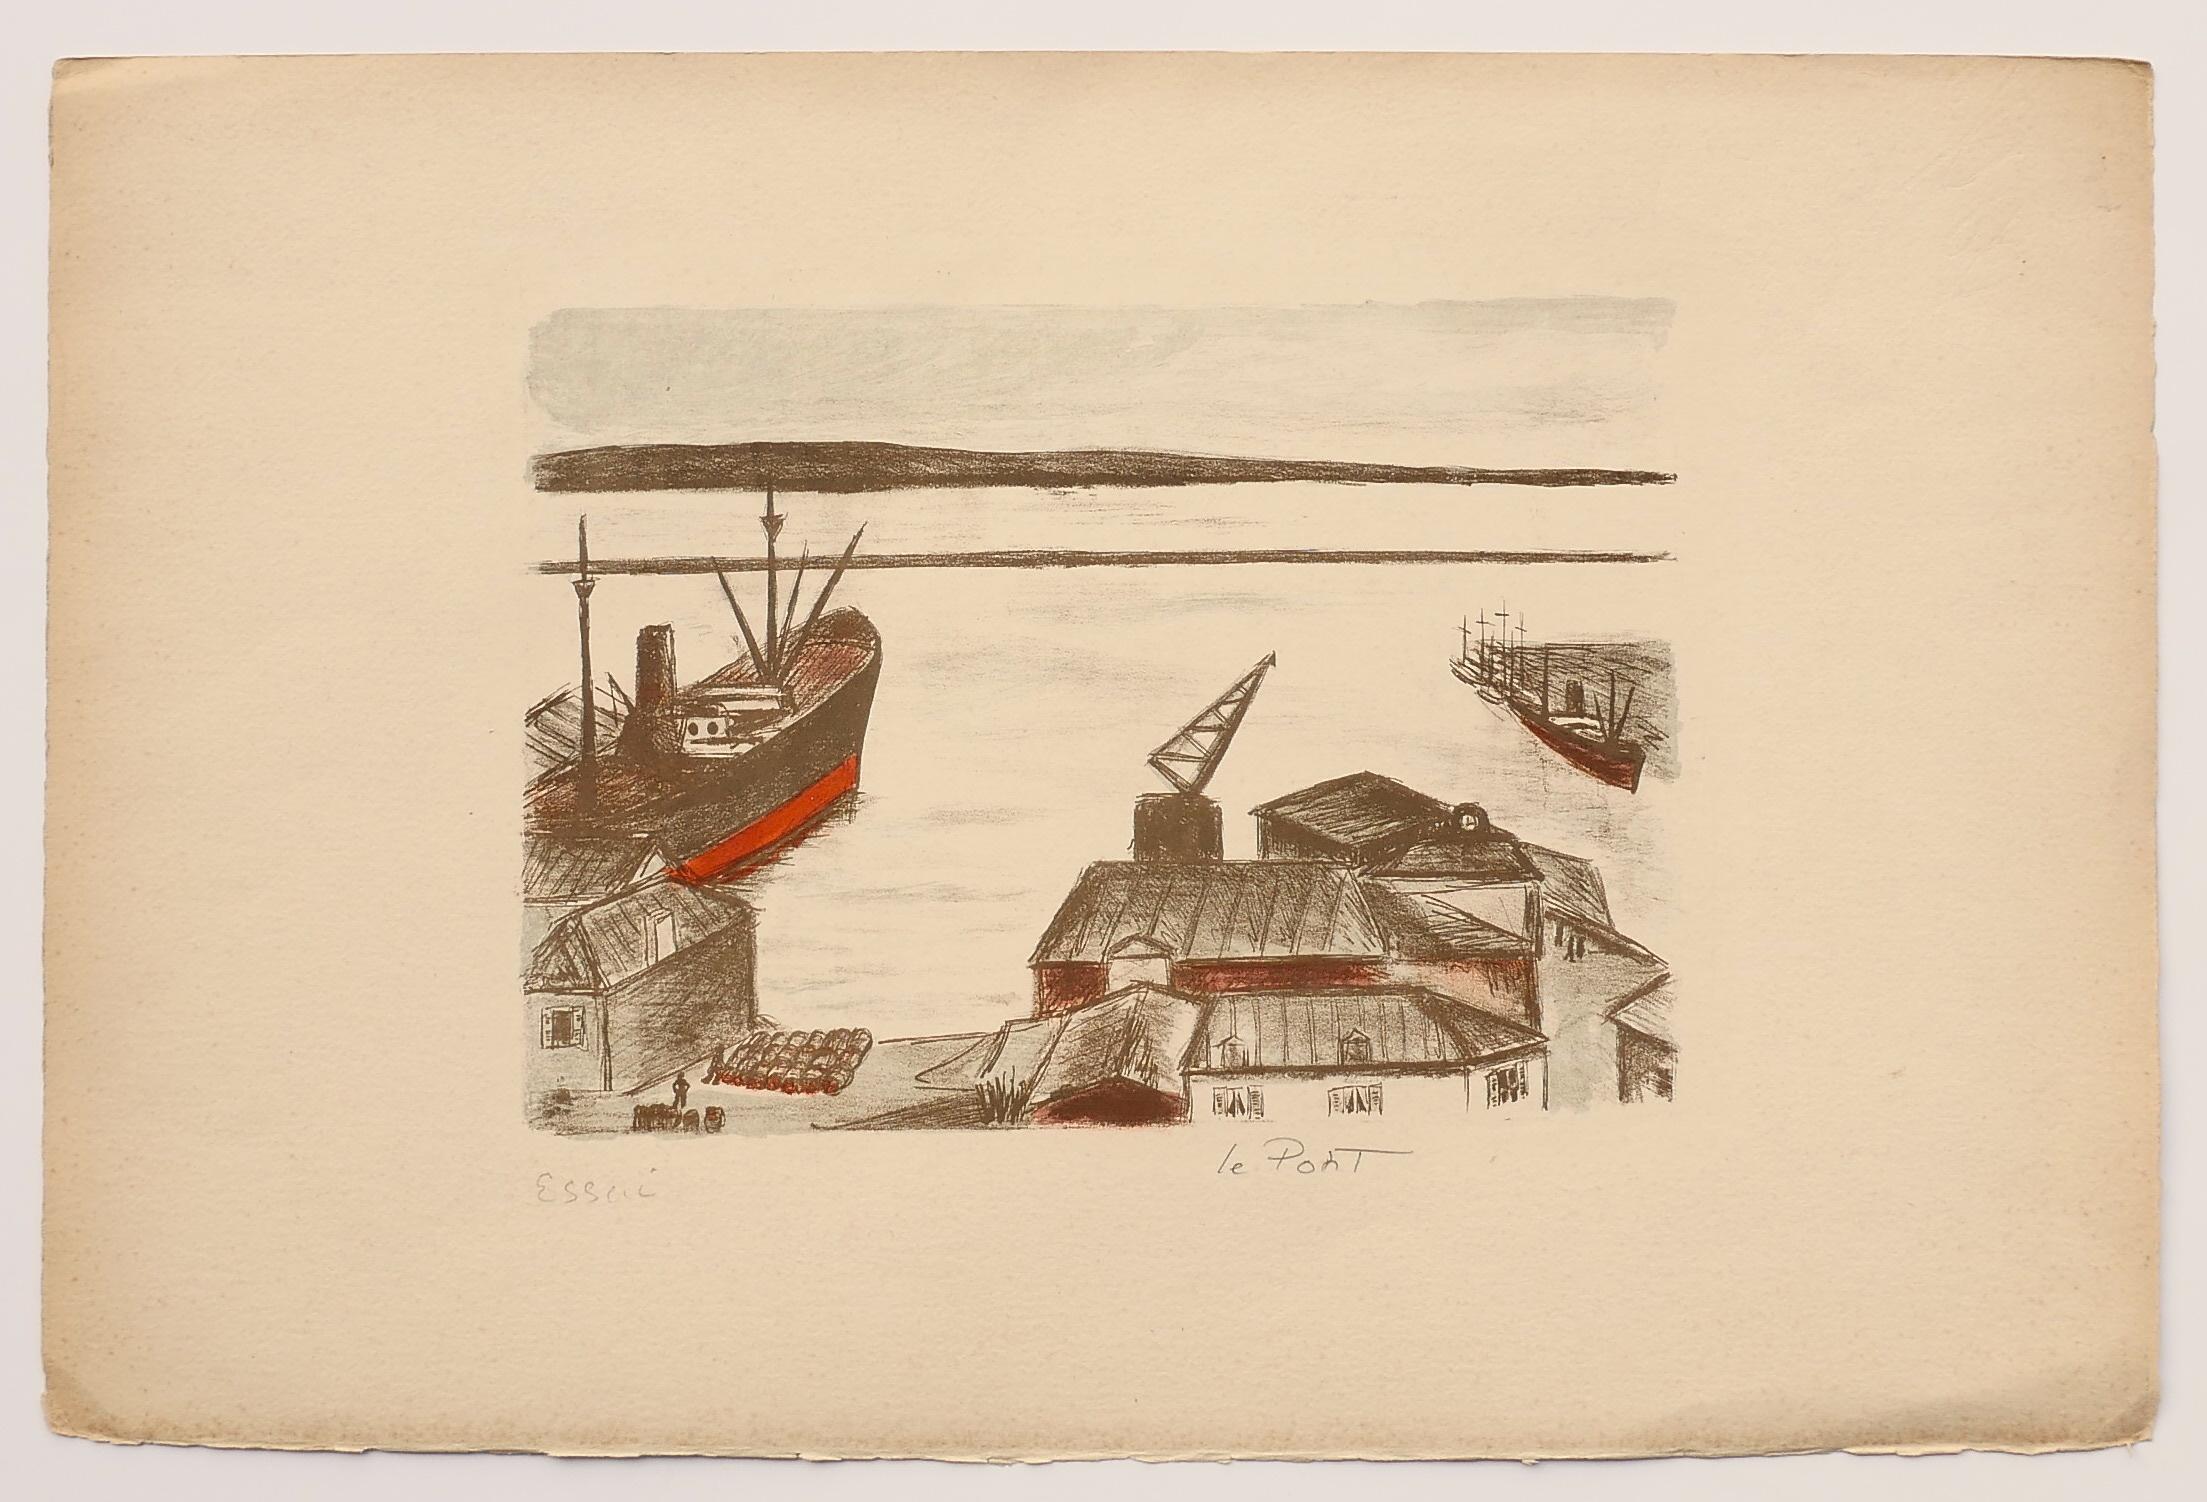 Port is an original modern artwork realized by the French artist Pierre Frachon-Forcade in the middle of the XX Century. 

Original Lithograph on paper. 

Just below the image is Written the title "Le port".

on the lower left just below the image